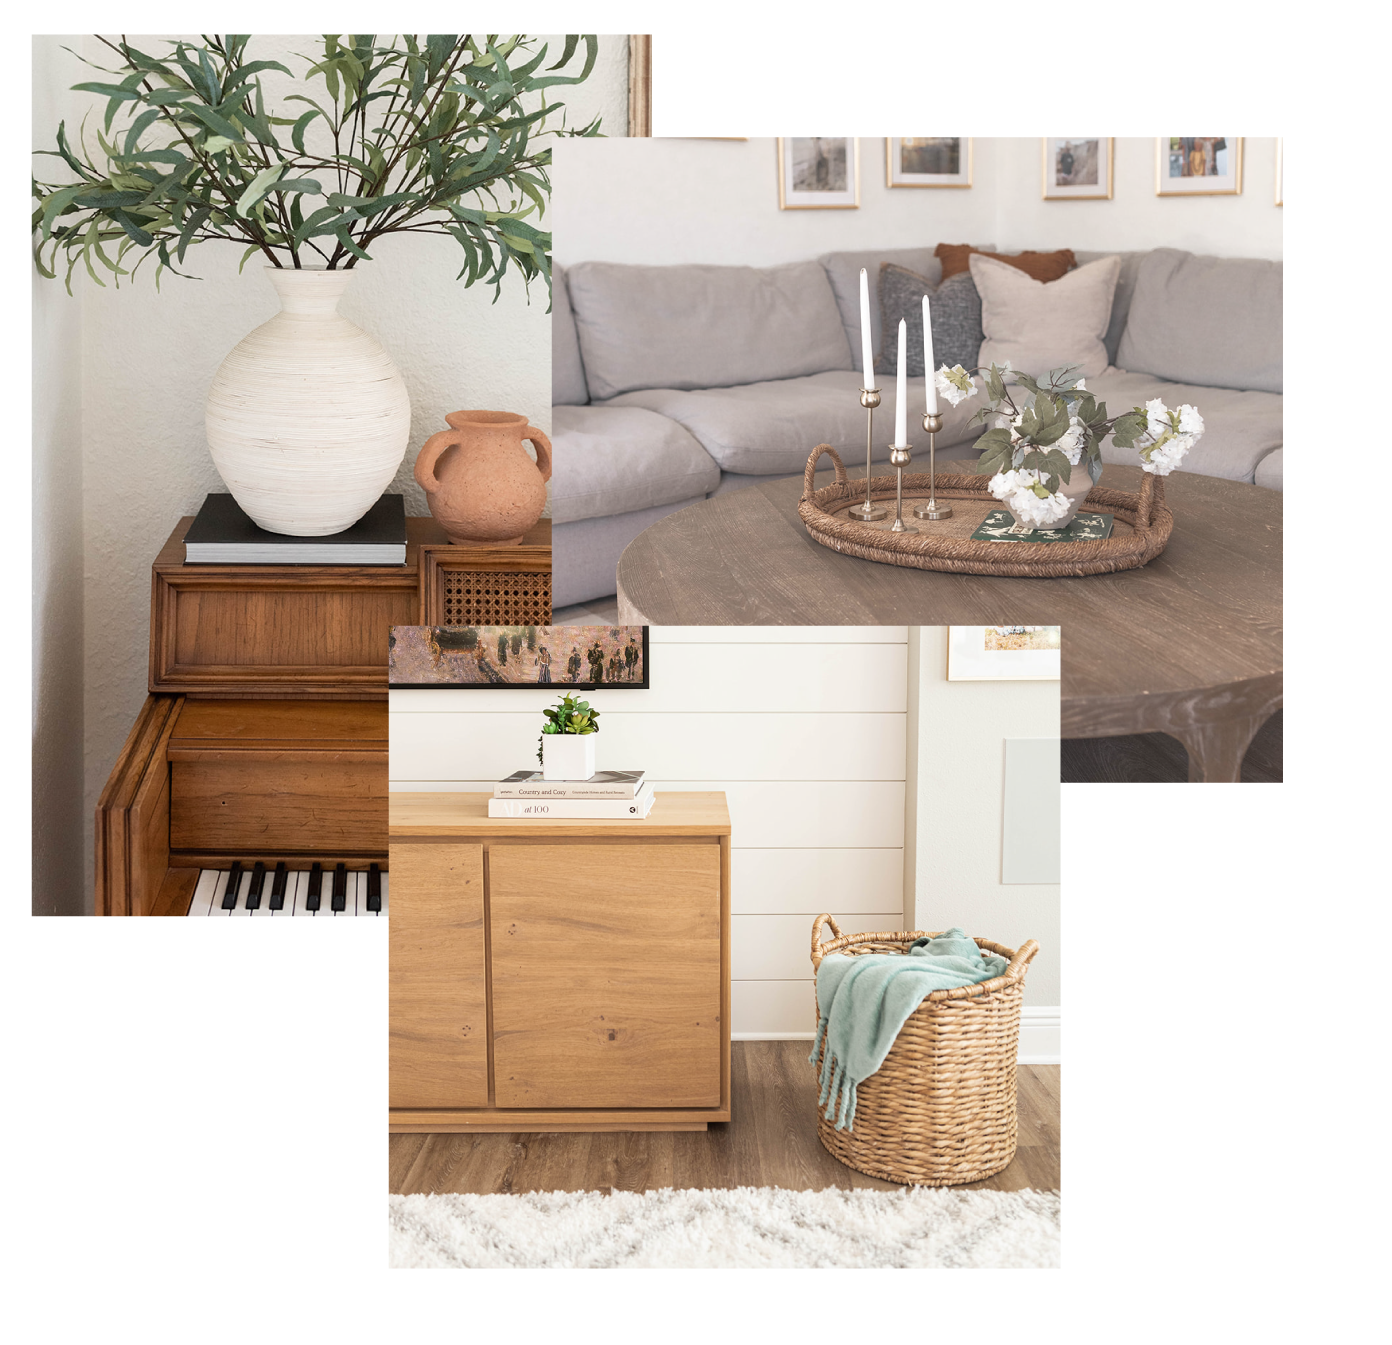 White vessel with green leaf branches on top of caramel wood piano - Dark wood coffee table with white candles and white flowers inside a flat barket on top, next to greyish mauve L-shaped sofa and warm-earth colors cushions - Light wood furniture next to basket with mint green inside on top of dark wood floor and light carpet